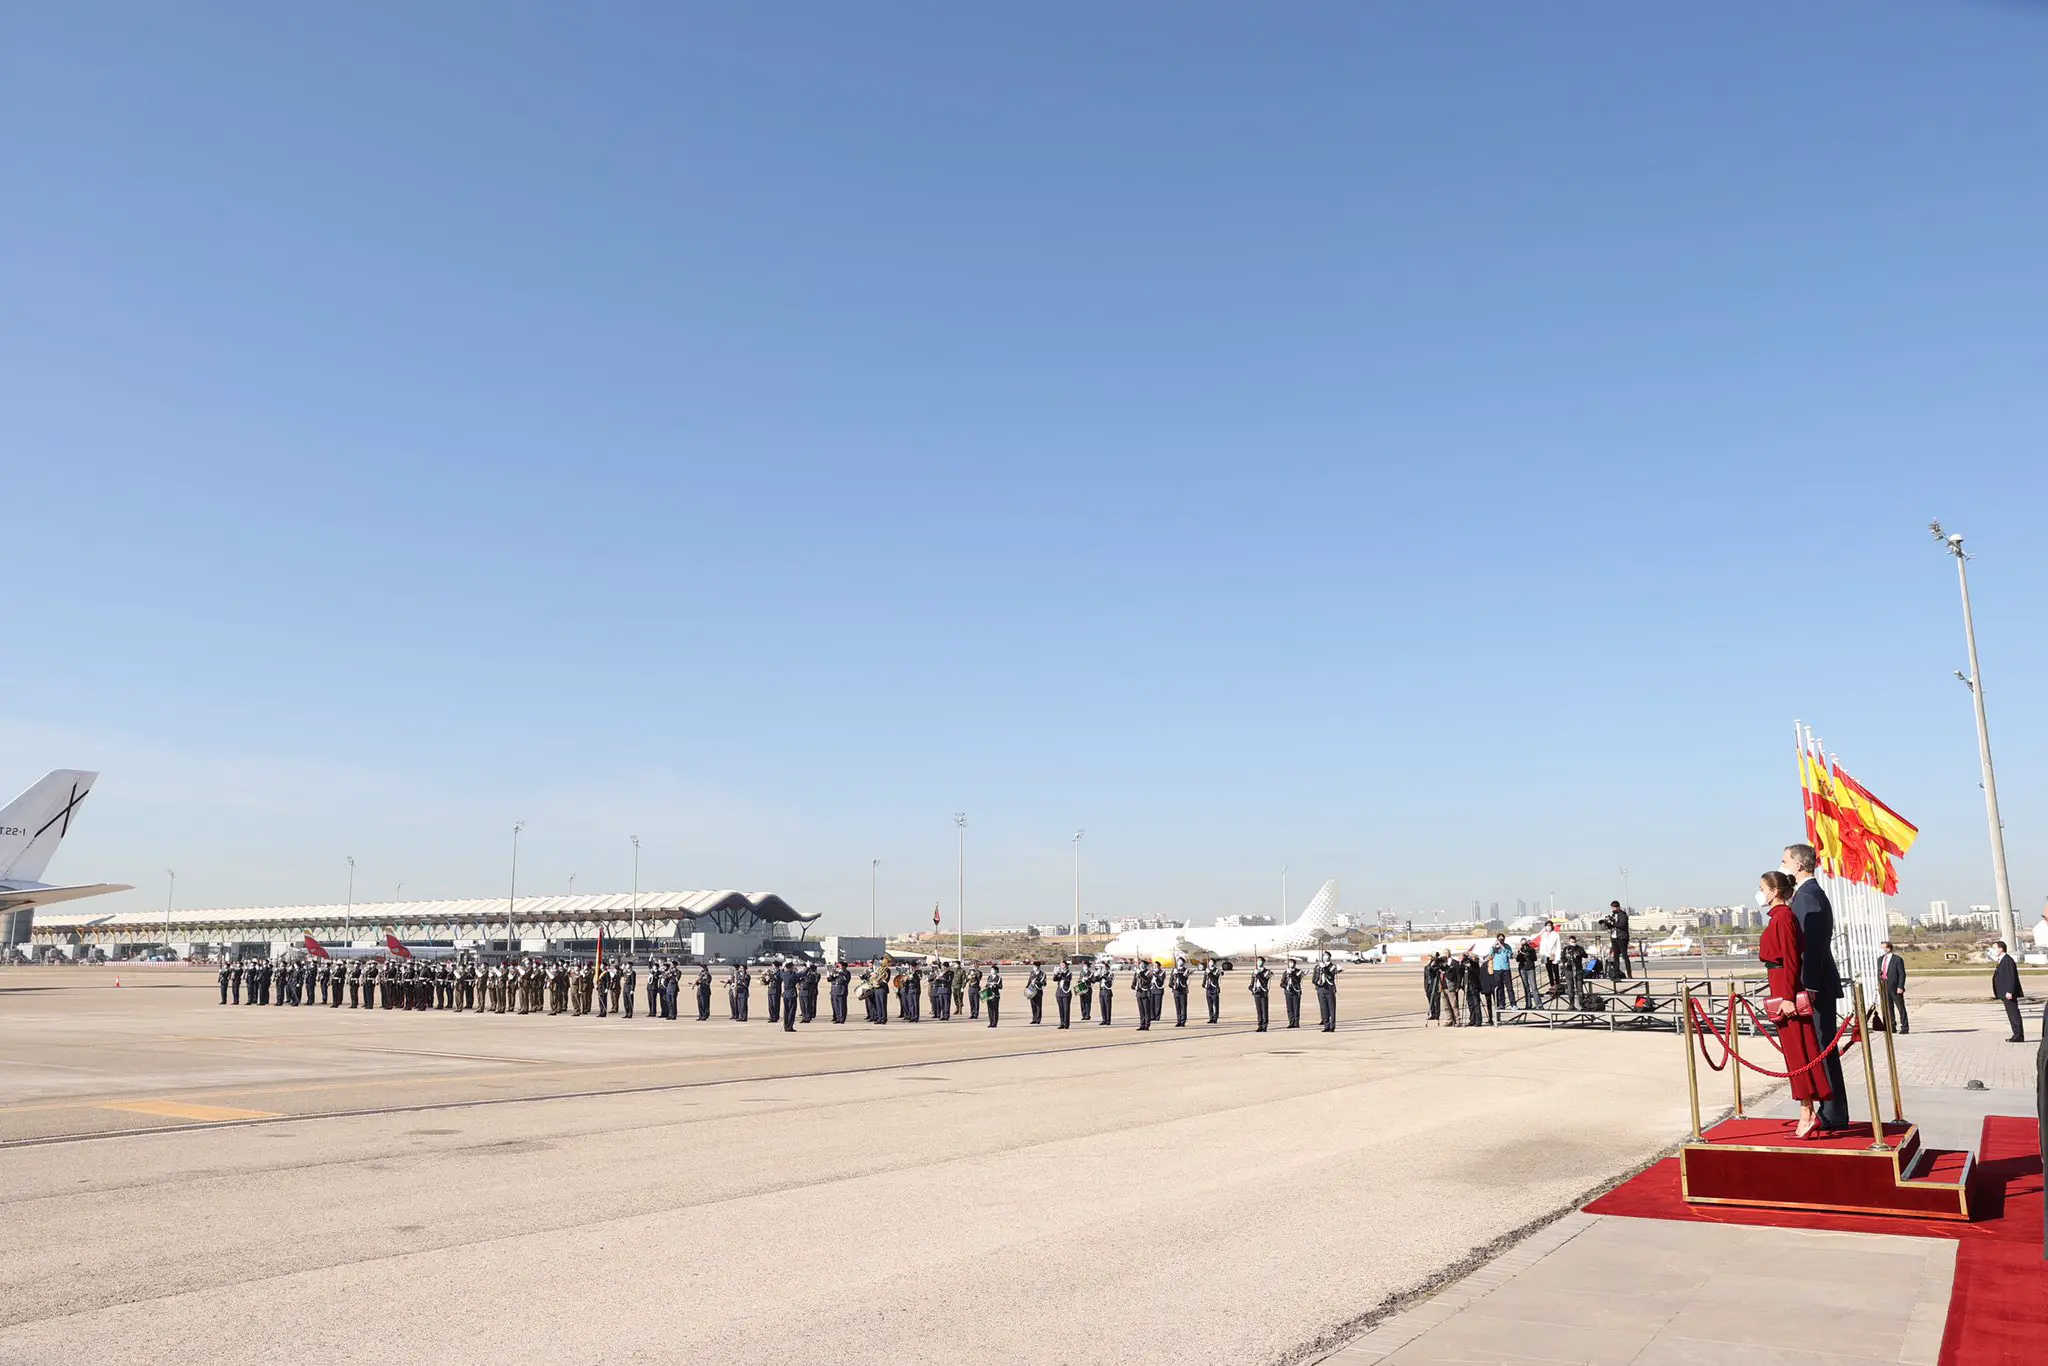 Felipe and Letizia taking the military salute before departing